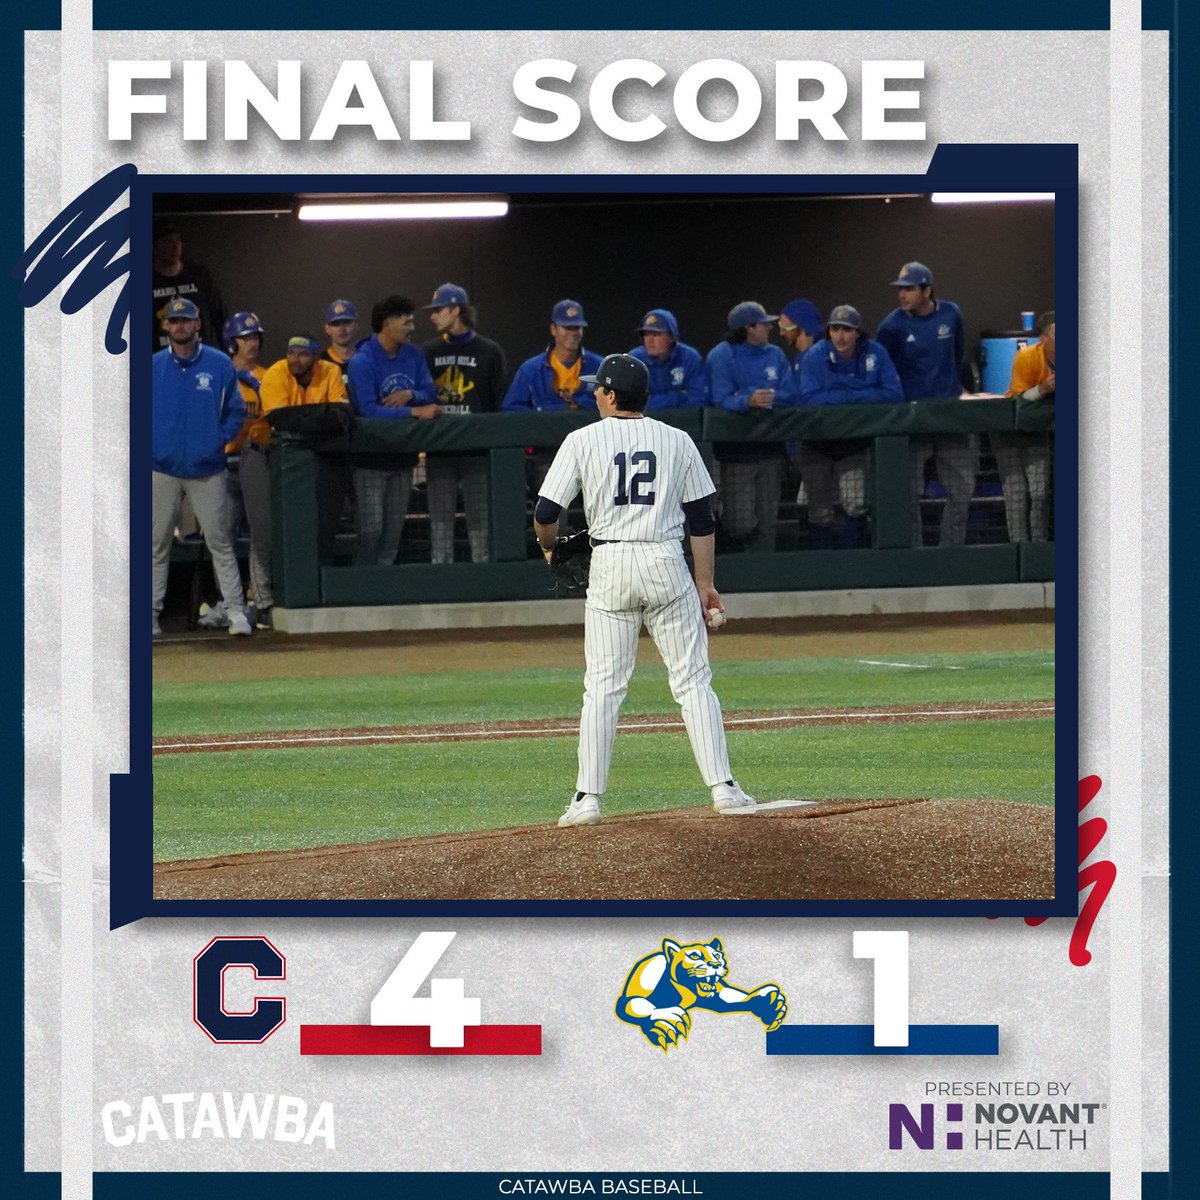 A 𝙁𝙞𝙣𝙚 evening indeed @CatawbaBaseball takes game one! Austin Fine goes 7.2 innings and collects 7 strikeouts. Back in Action tomorrow for games 2 & 3 #BeYourOwnHero